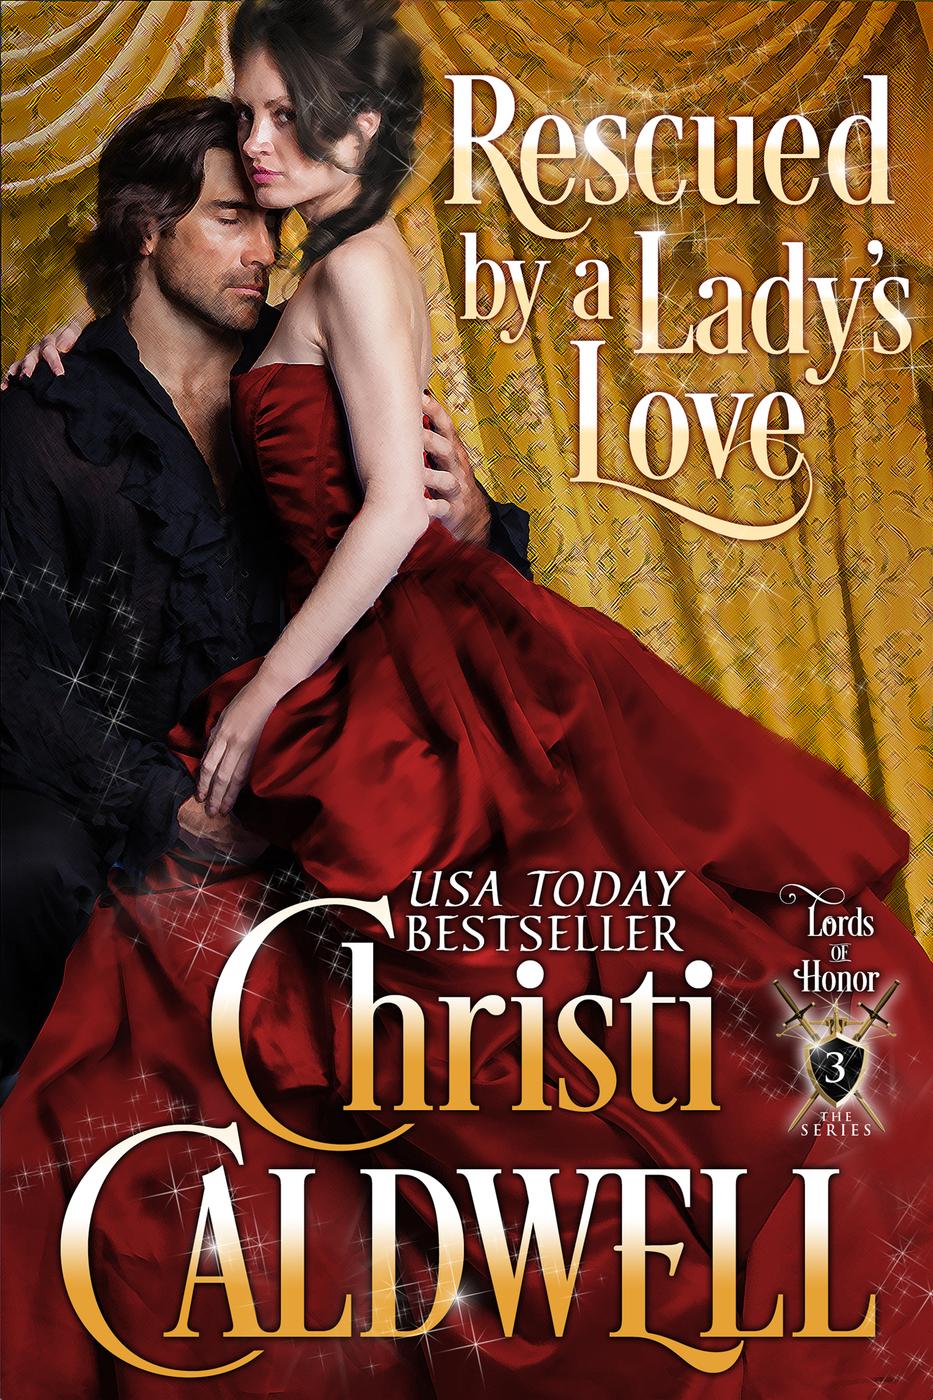 Rescued By a Lady's Love (Lords of Honor, #3) (2016) by Christi Caldwell